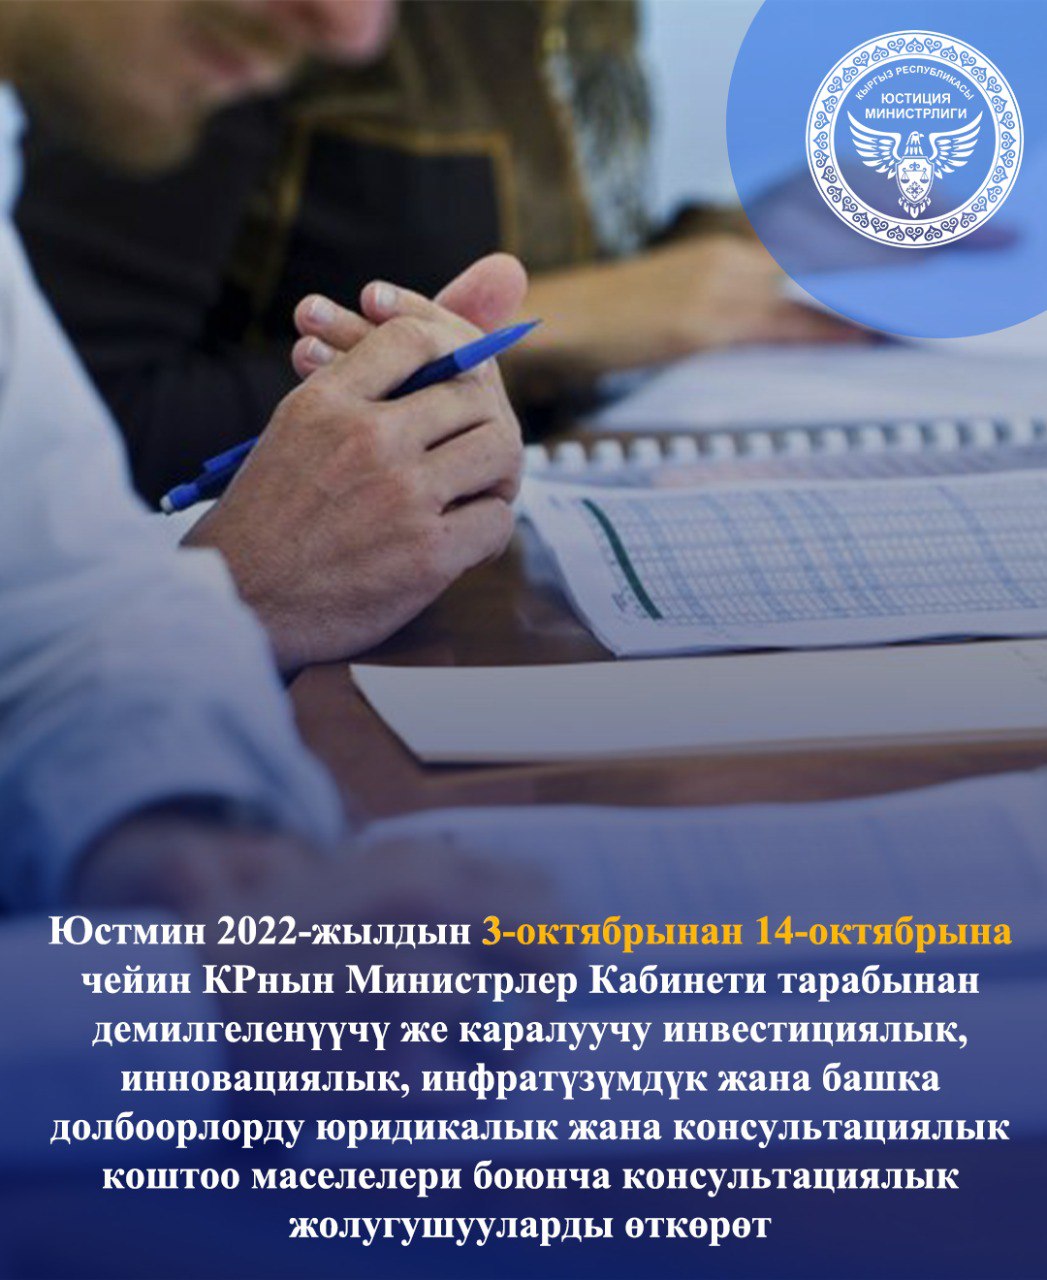 Ministry of Justice of the Kyrgyz Republic shall consult